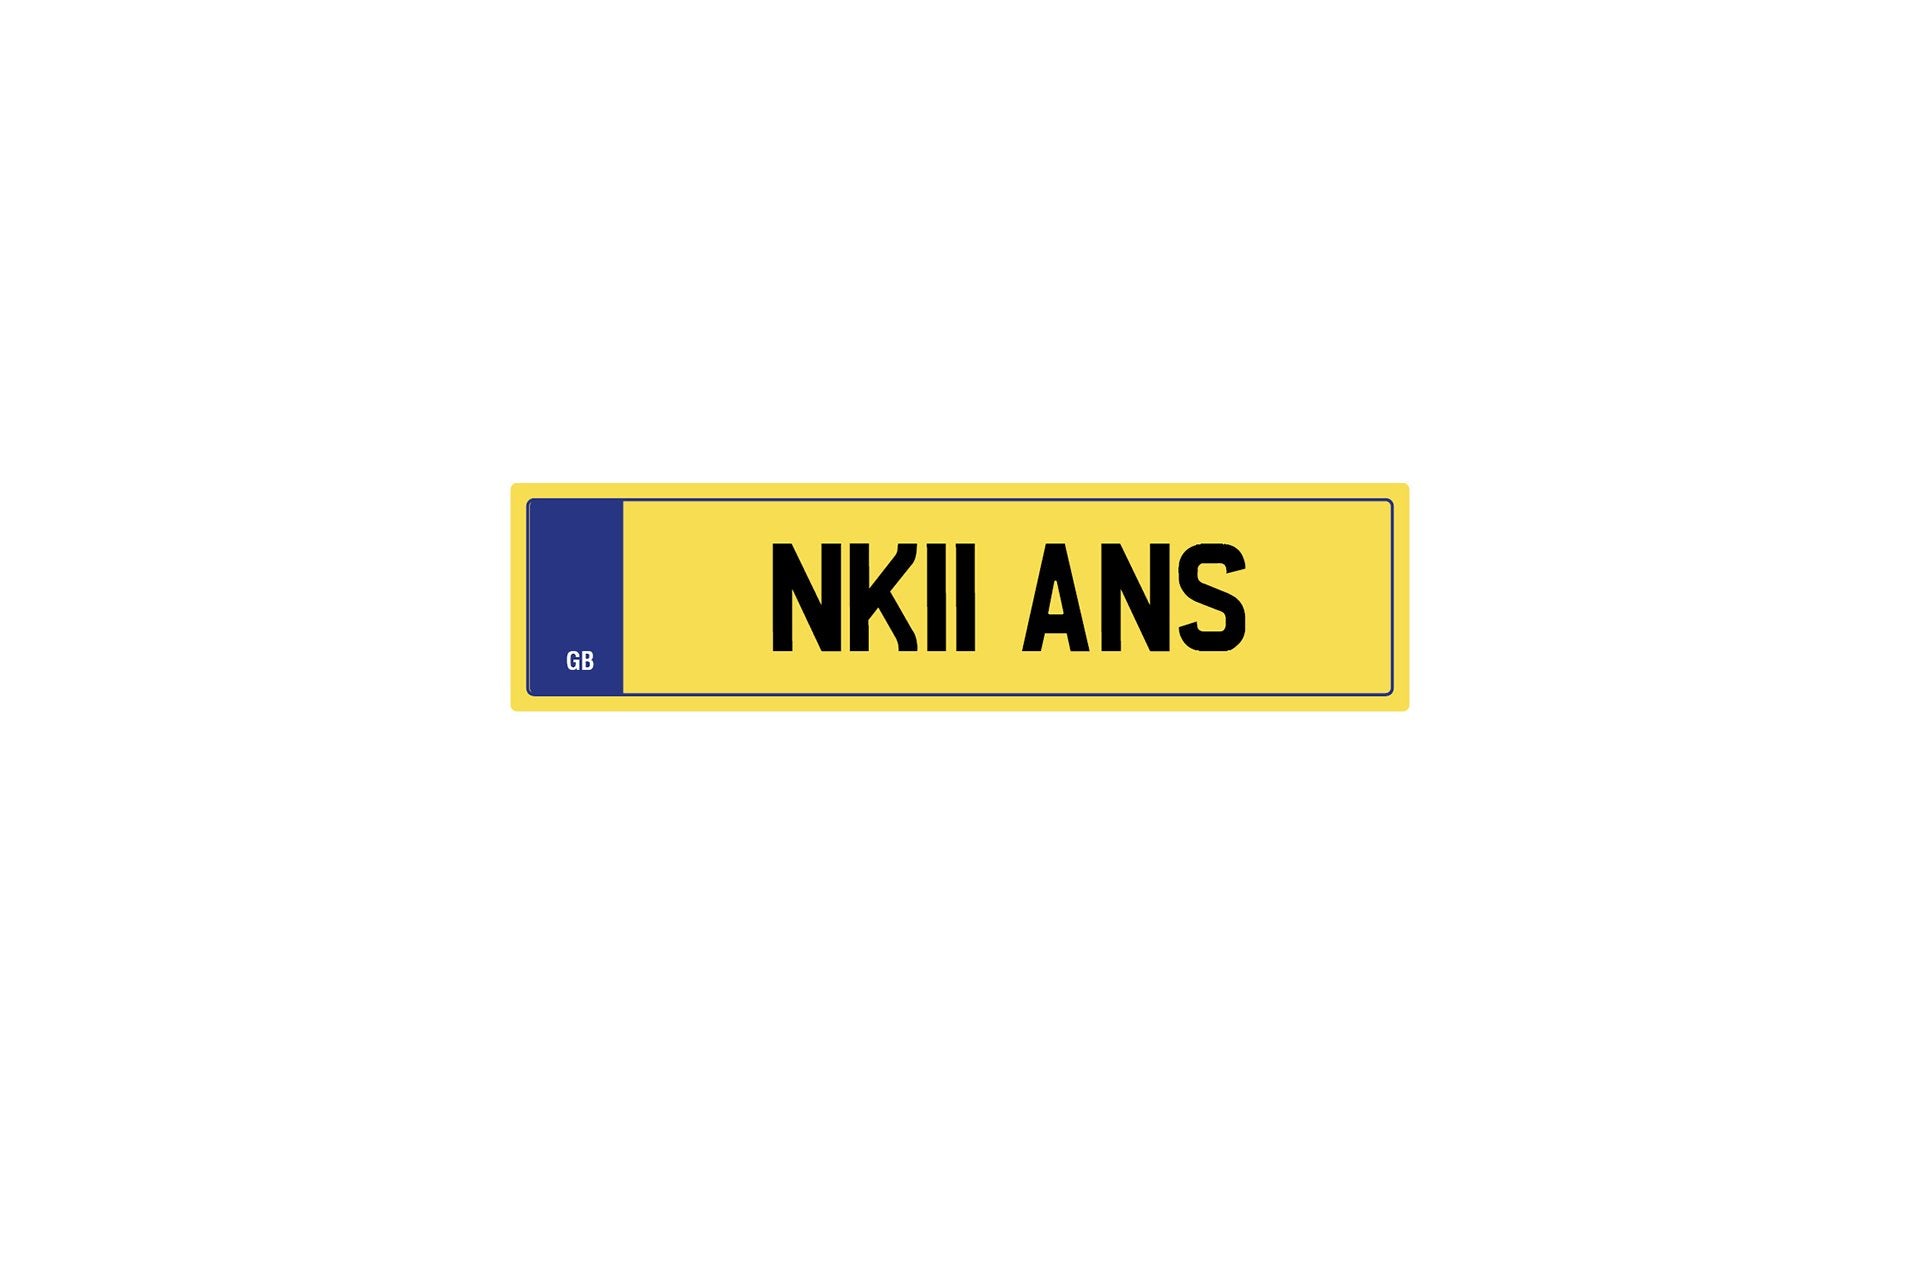 Private Plate Nk11 Ans by Kahn - Image 189